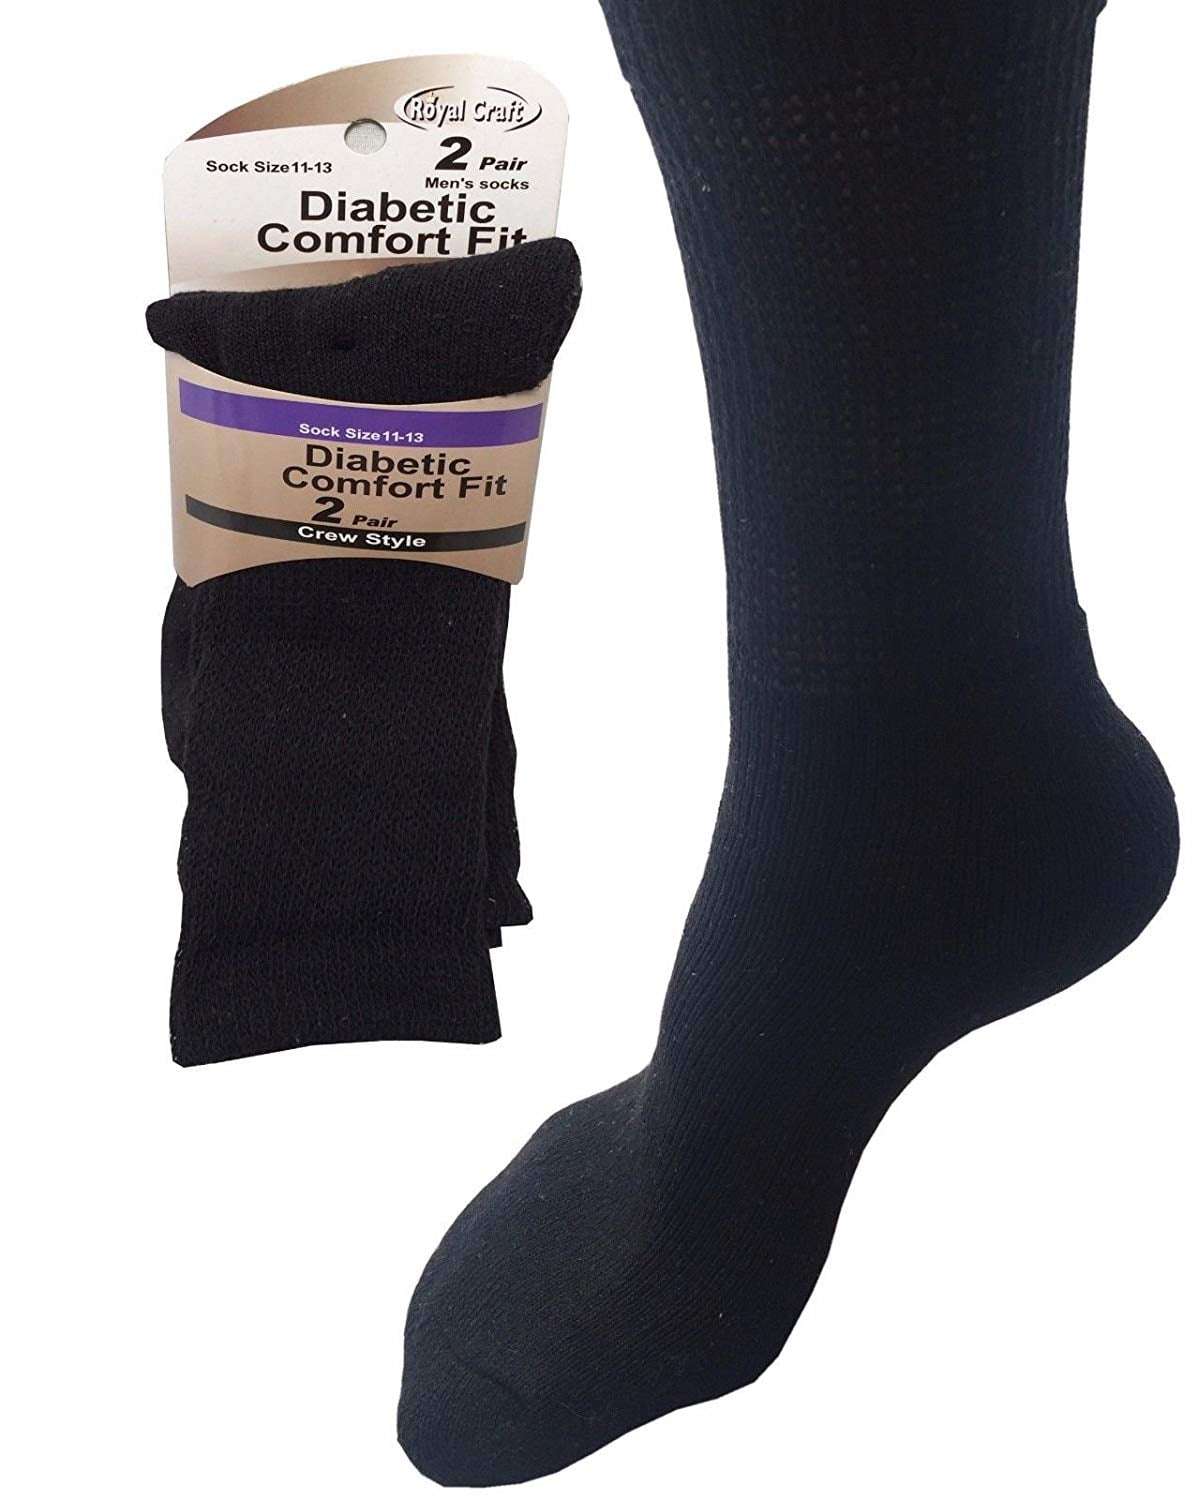 Business Socks in Solid black 12 Pairs mid weight Diabetic Socks for Mens 7-11 